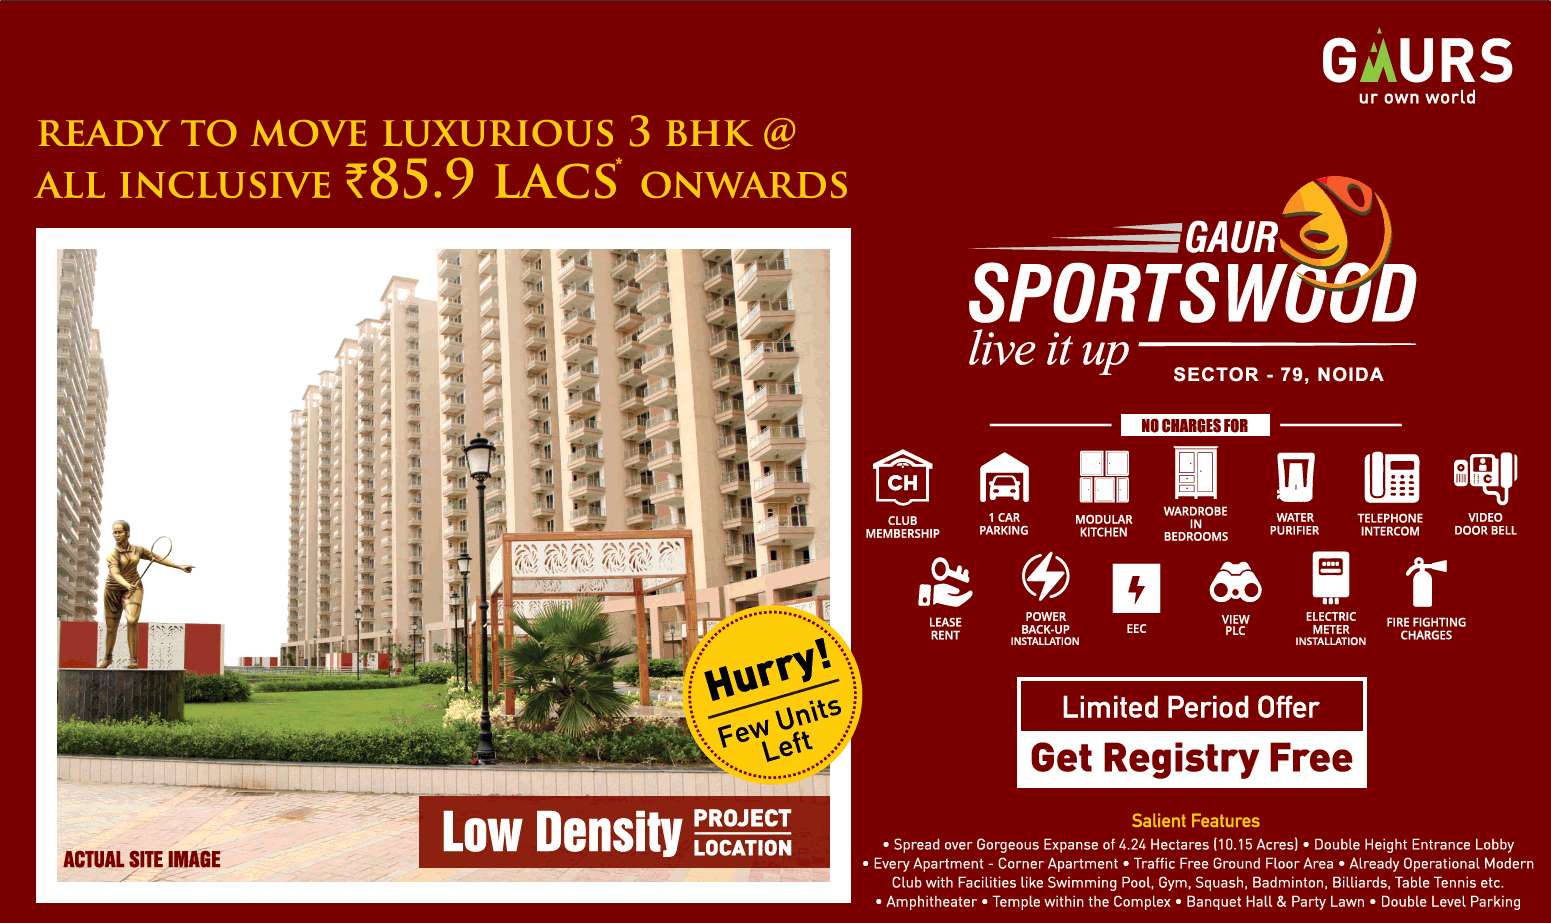 Book ready to move luxurious 3 BHK at Rs 85.9 Lacs at Gaur Sportswood in Sector 79, Noida